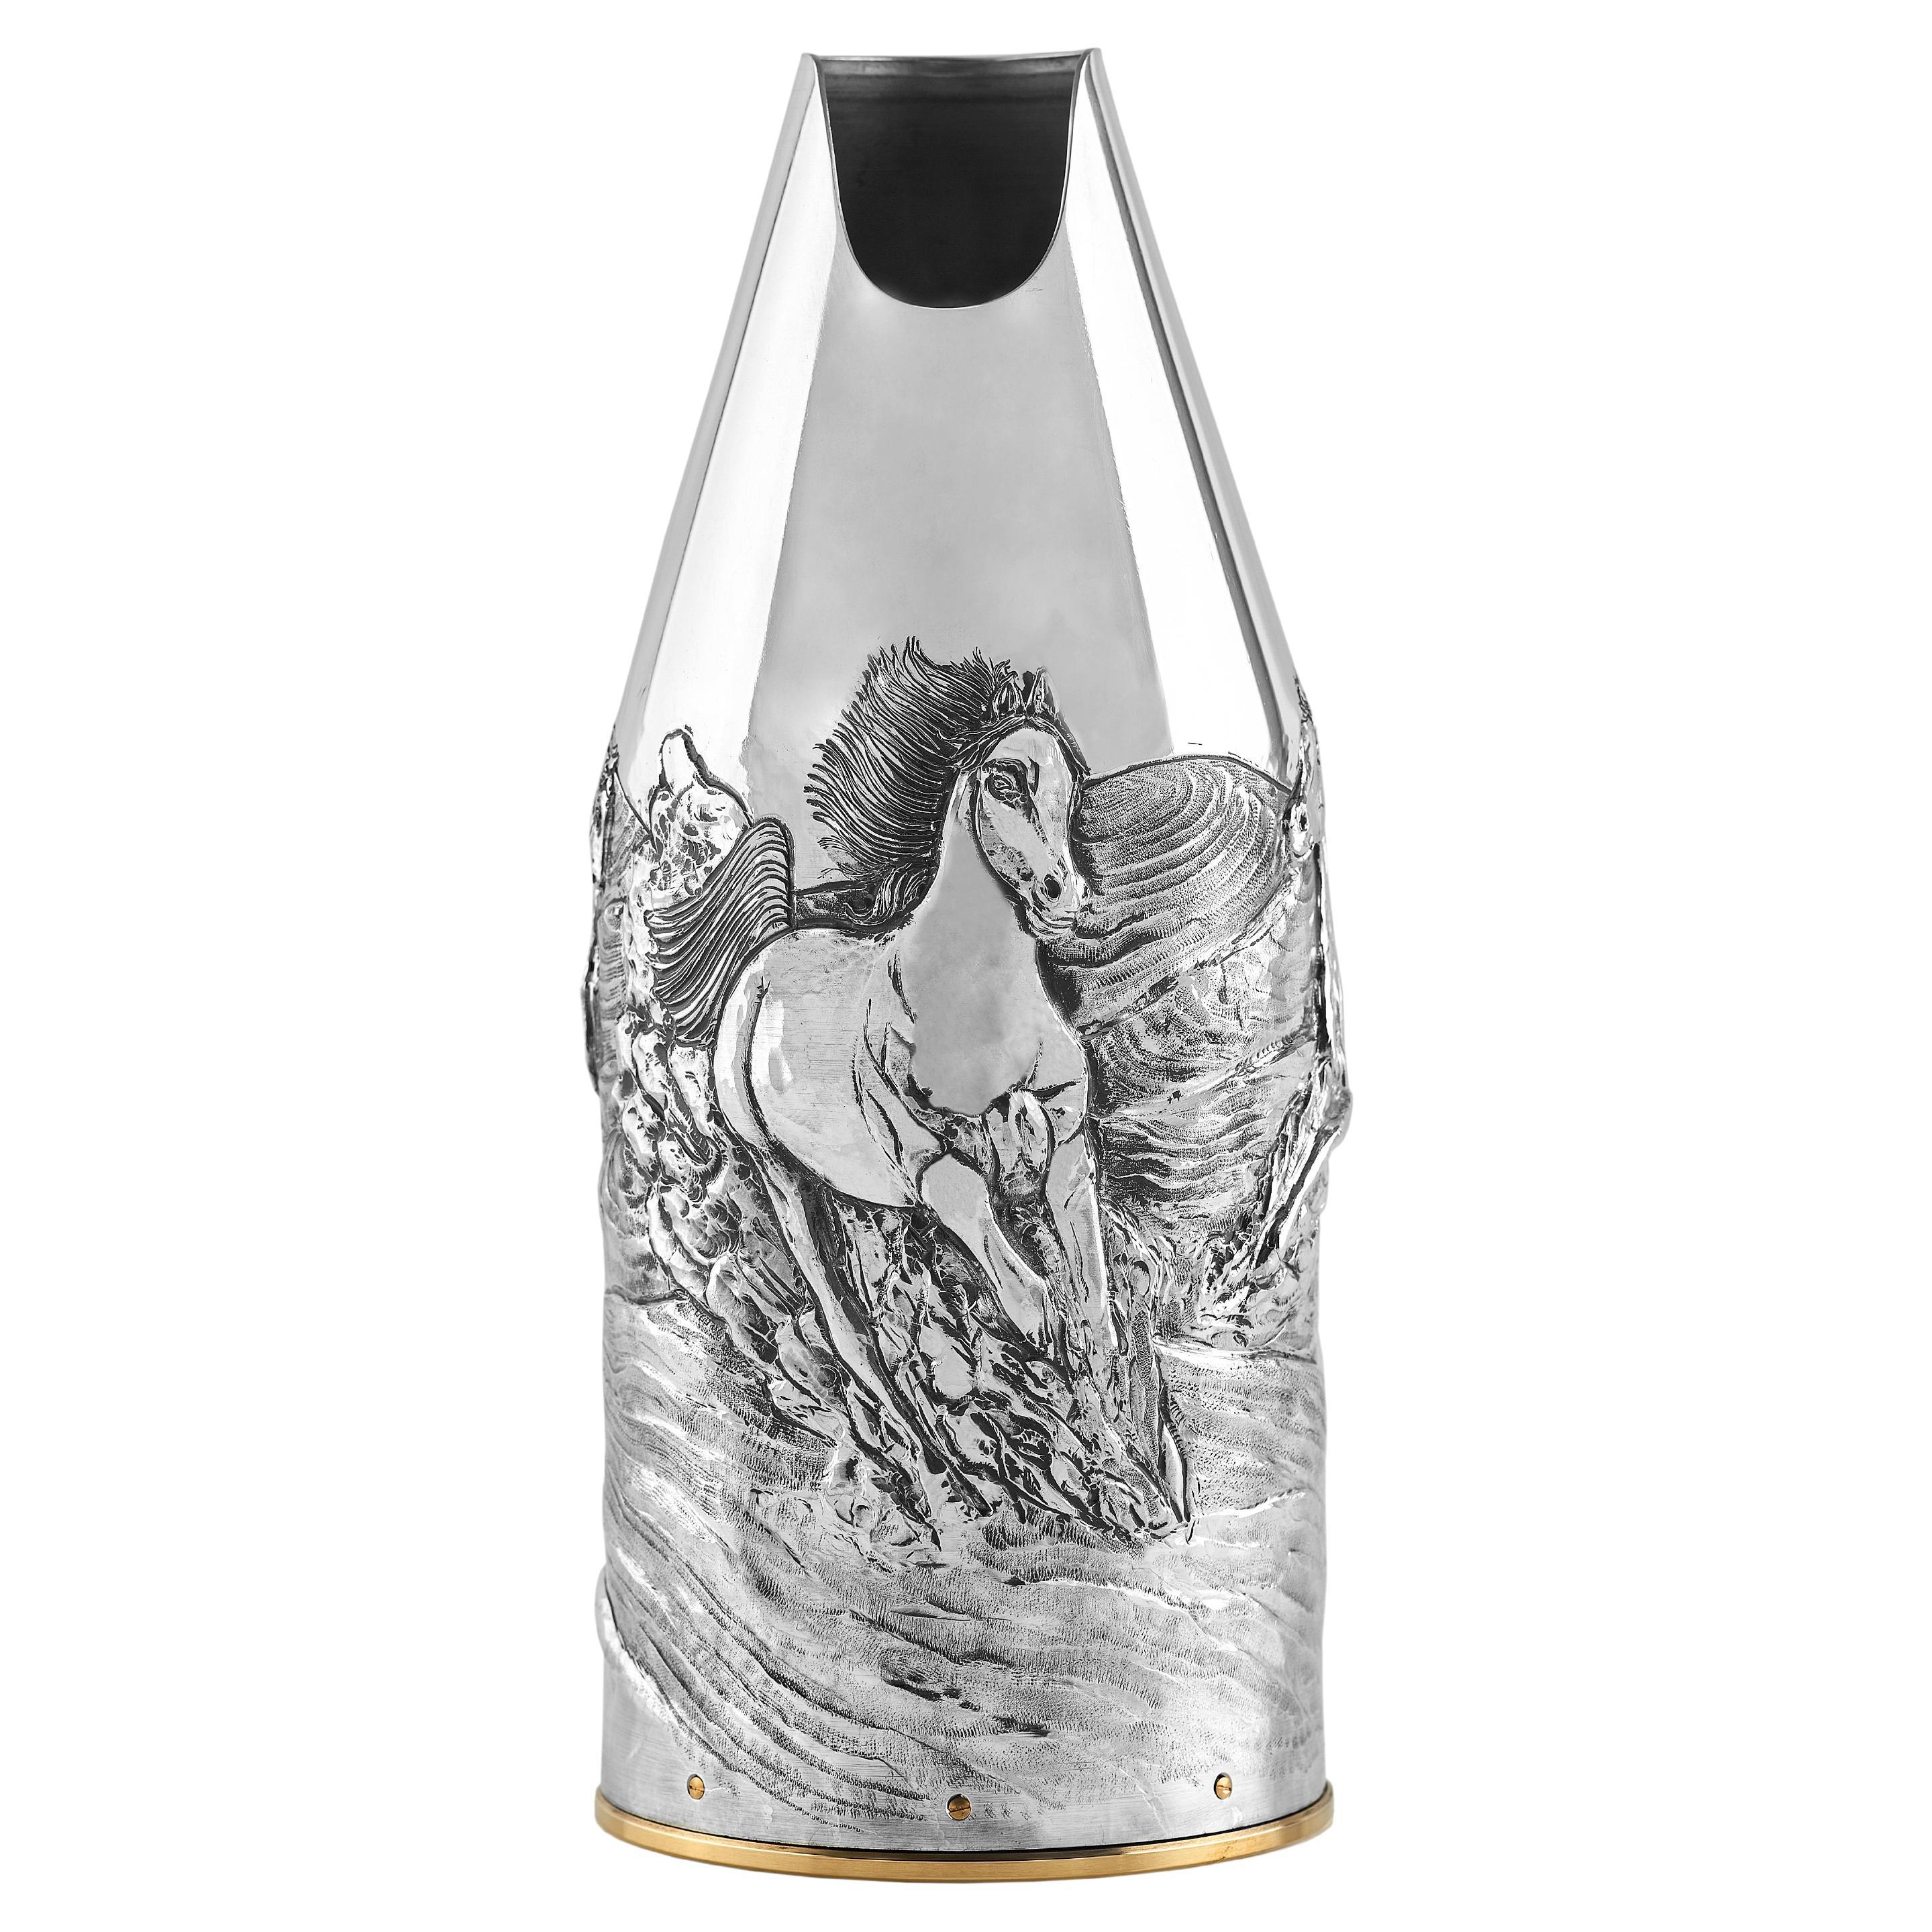 Champagne bottle K-over, Spirit, Solid Pure Italian Silver 